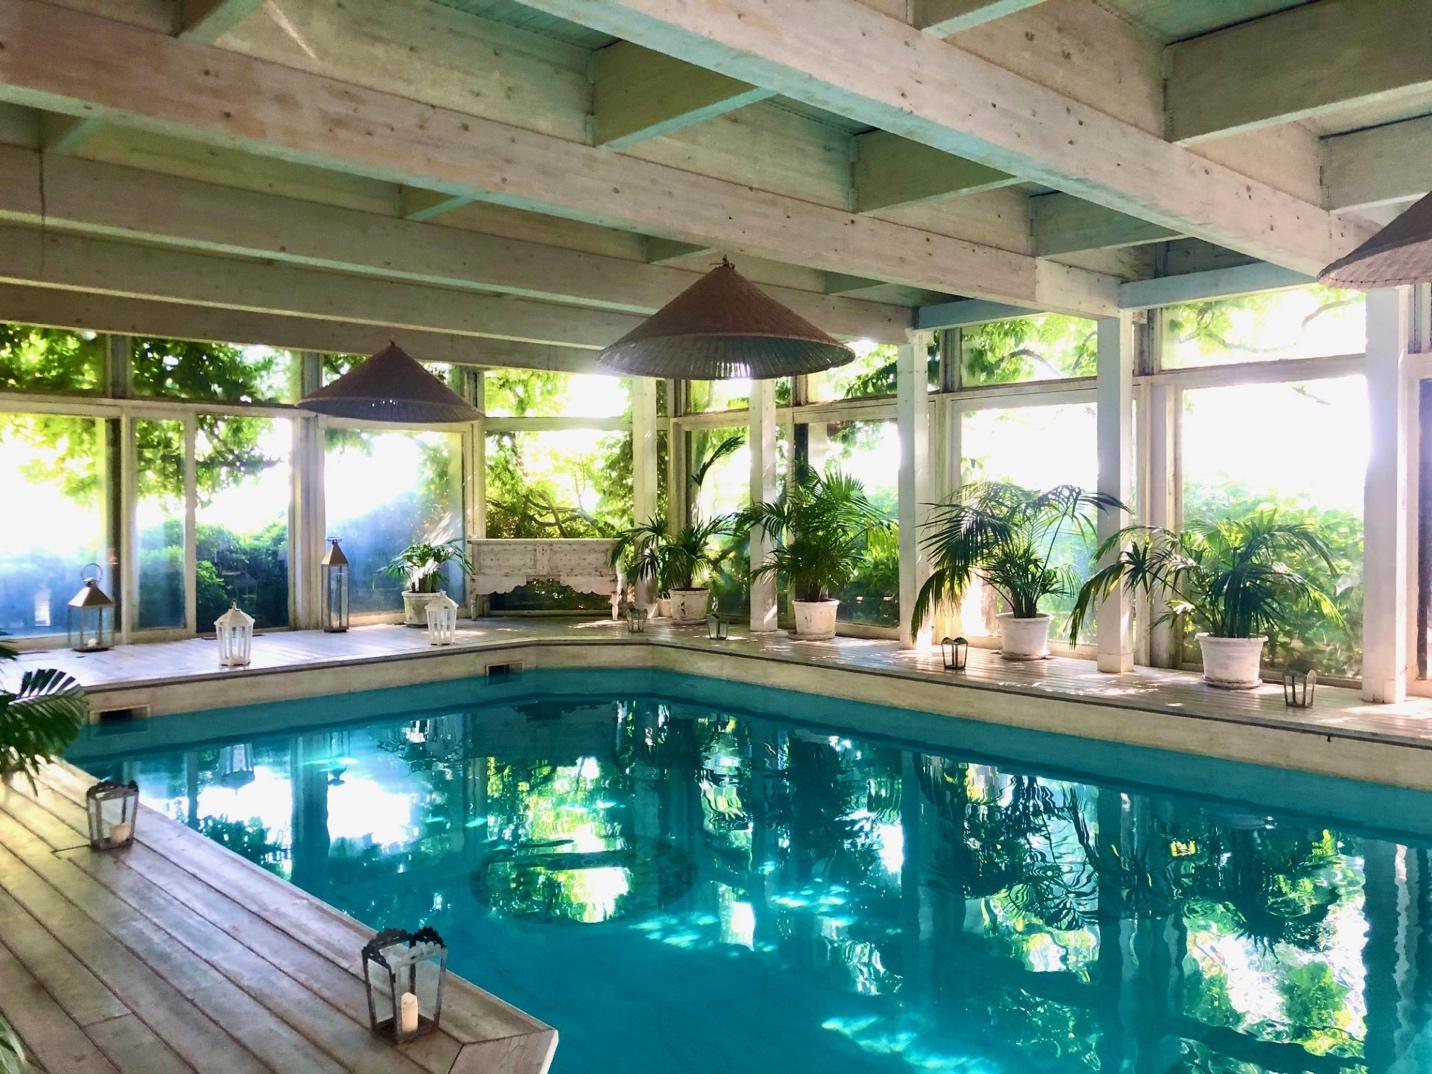 Swimming pool inside a luxury villa in Umbria, lined with plants and floor-to-ceiling windows.